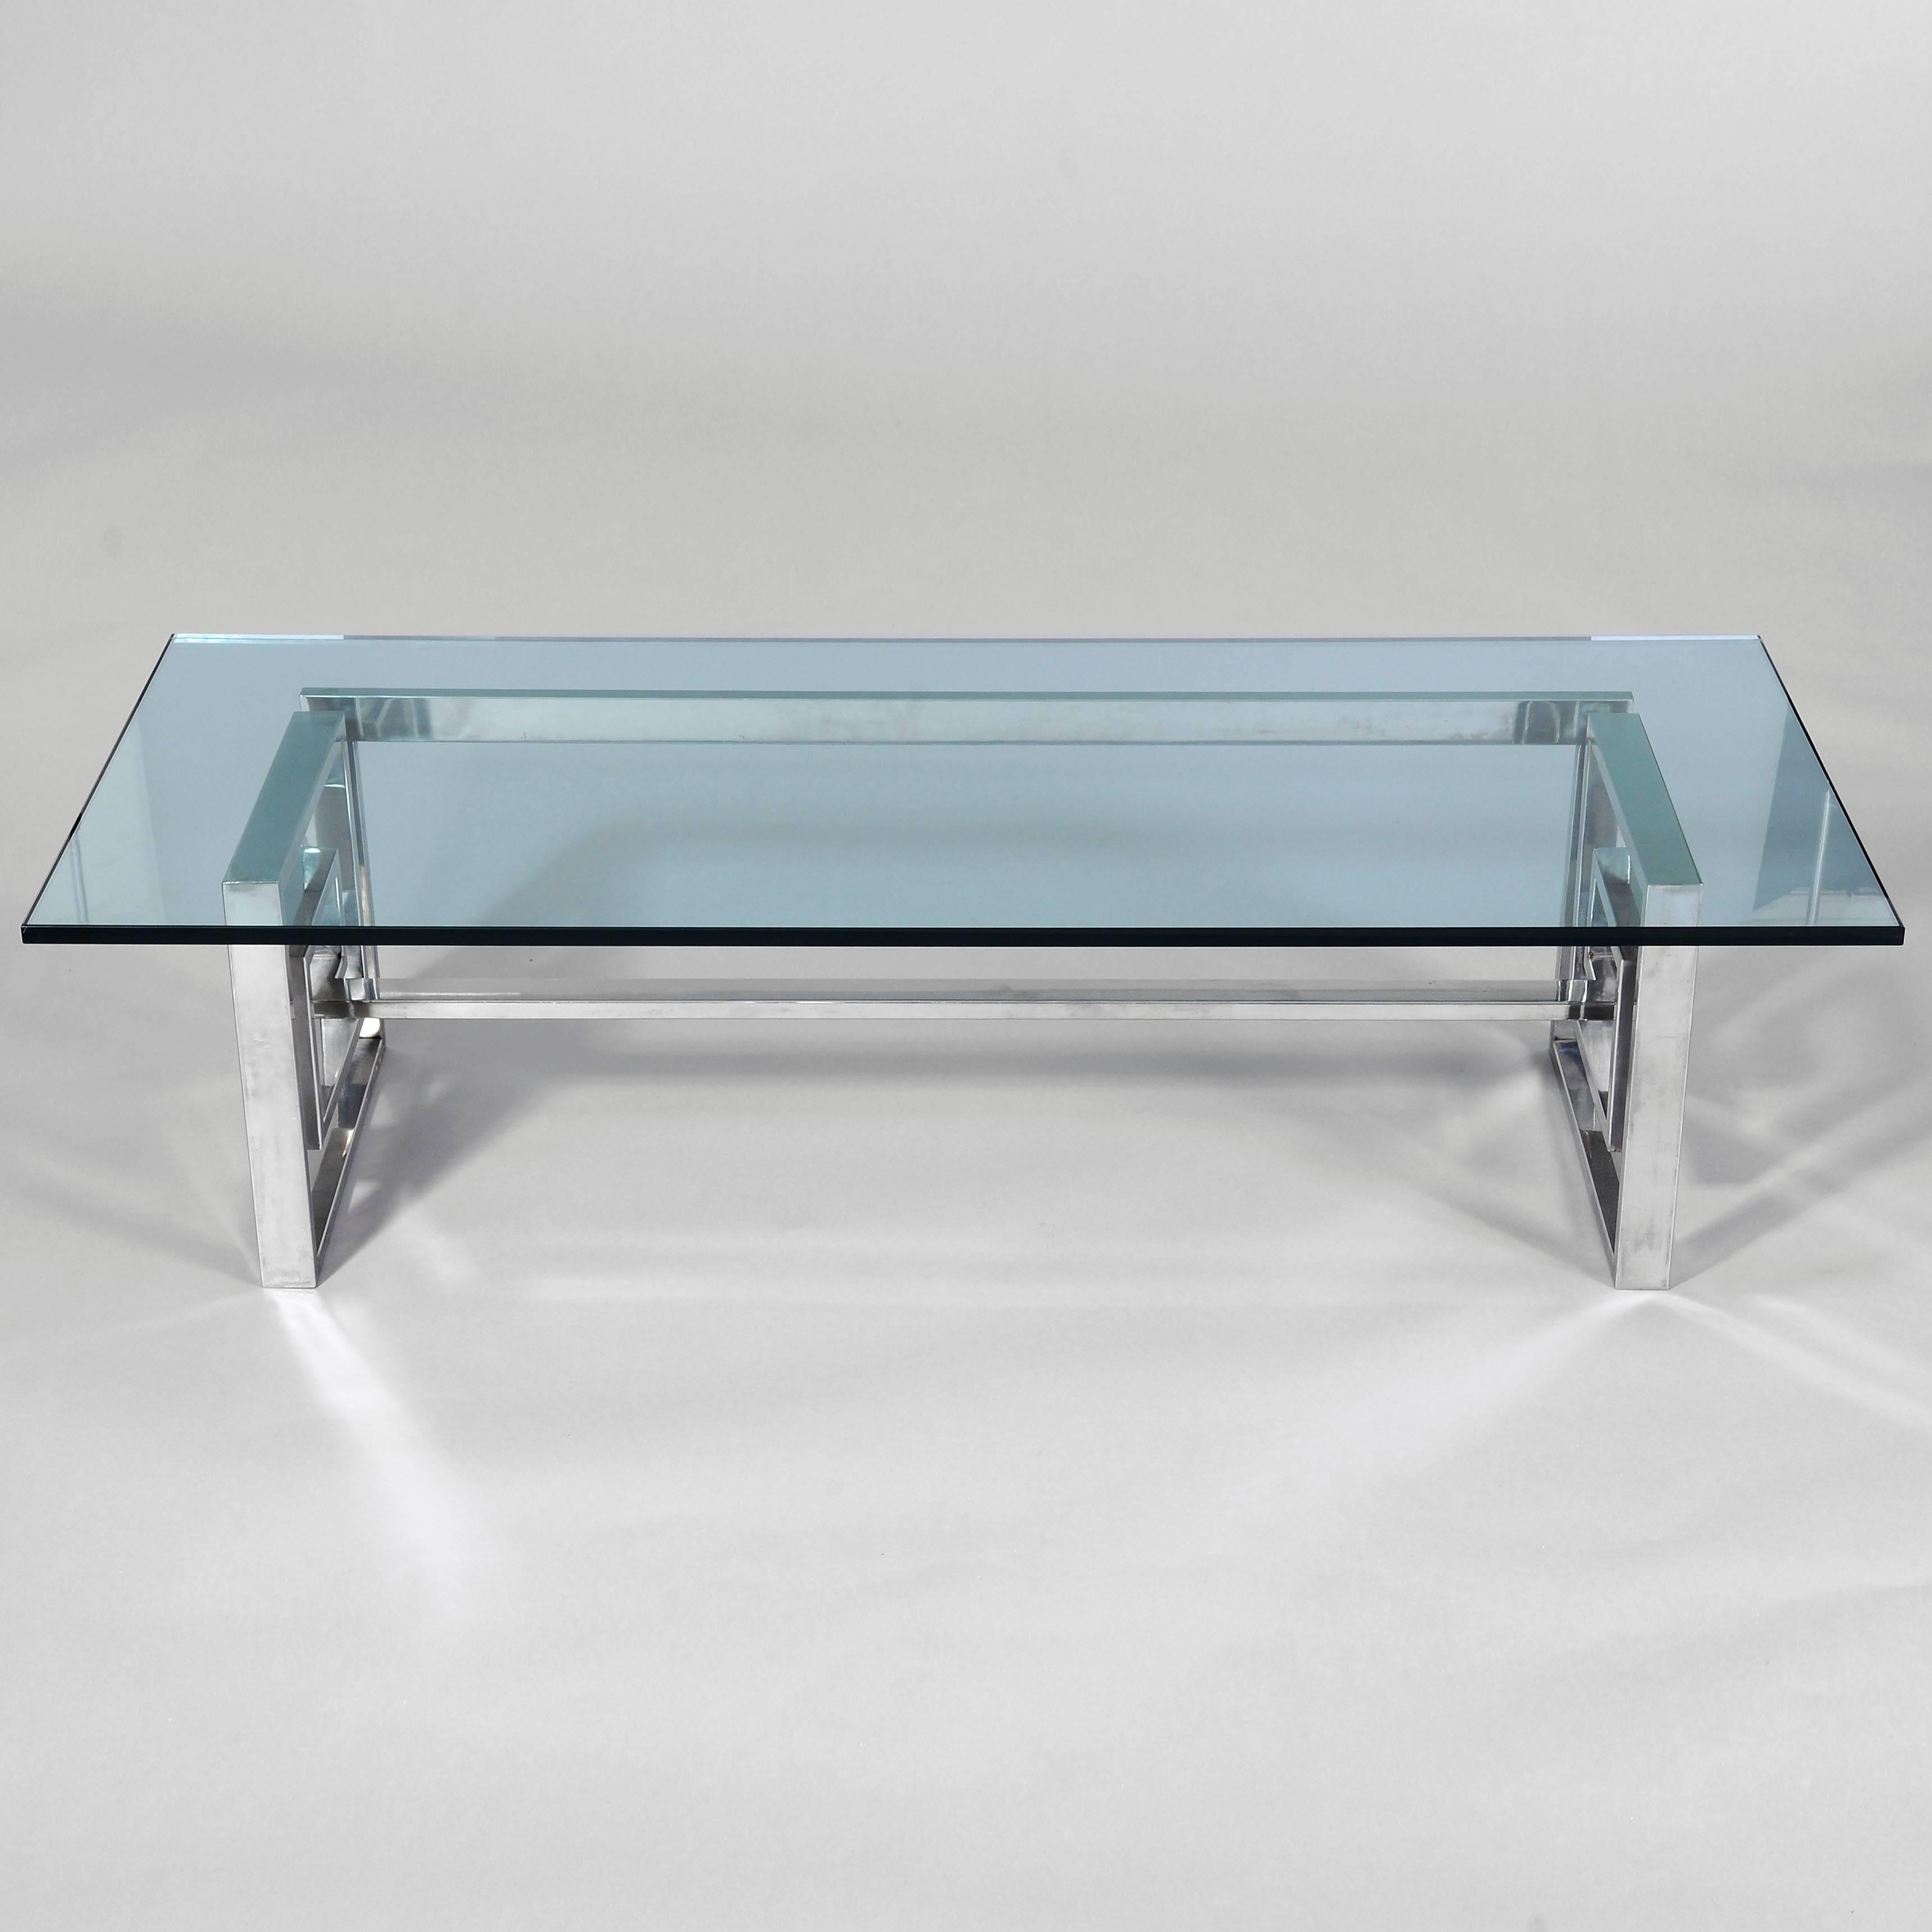 A glamorous table in steel and glass. The steel base, fashioned into one continuous strip, supports a chunky, substantial 20mm (approximate 3/4 inch) glass top. The base is imprinted with the 